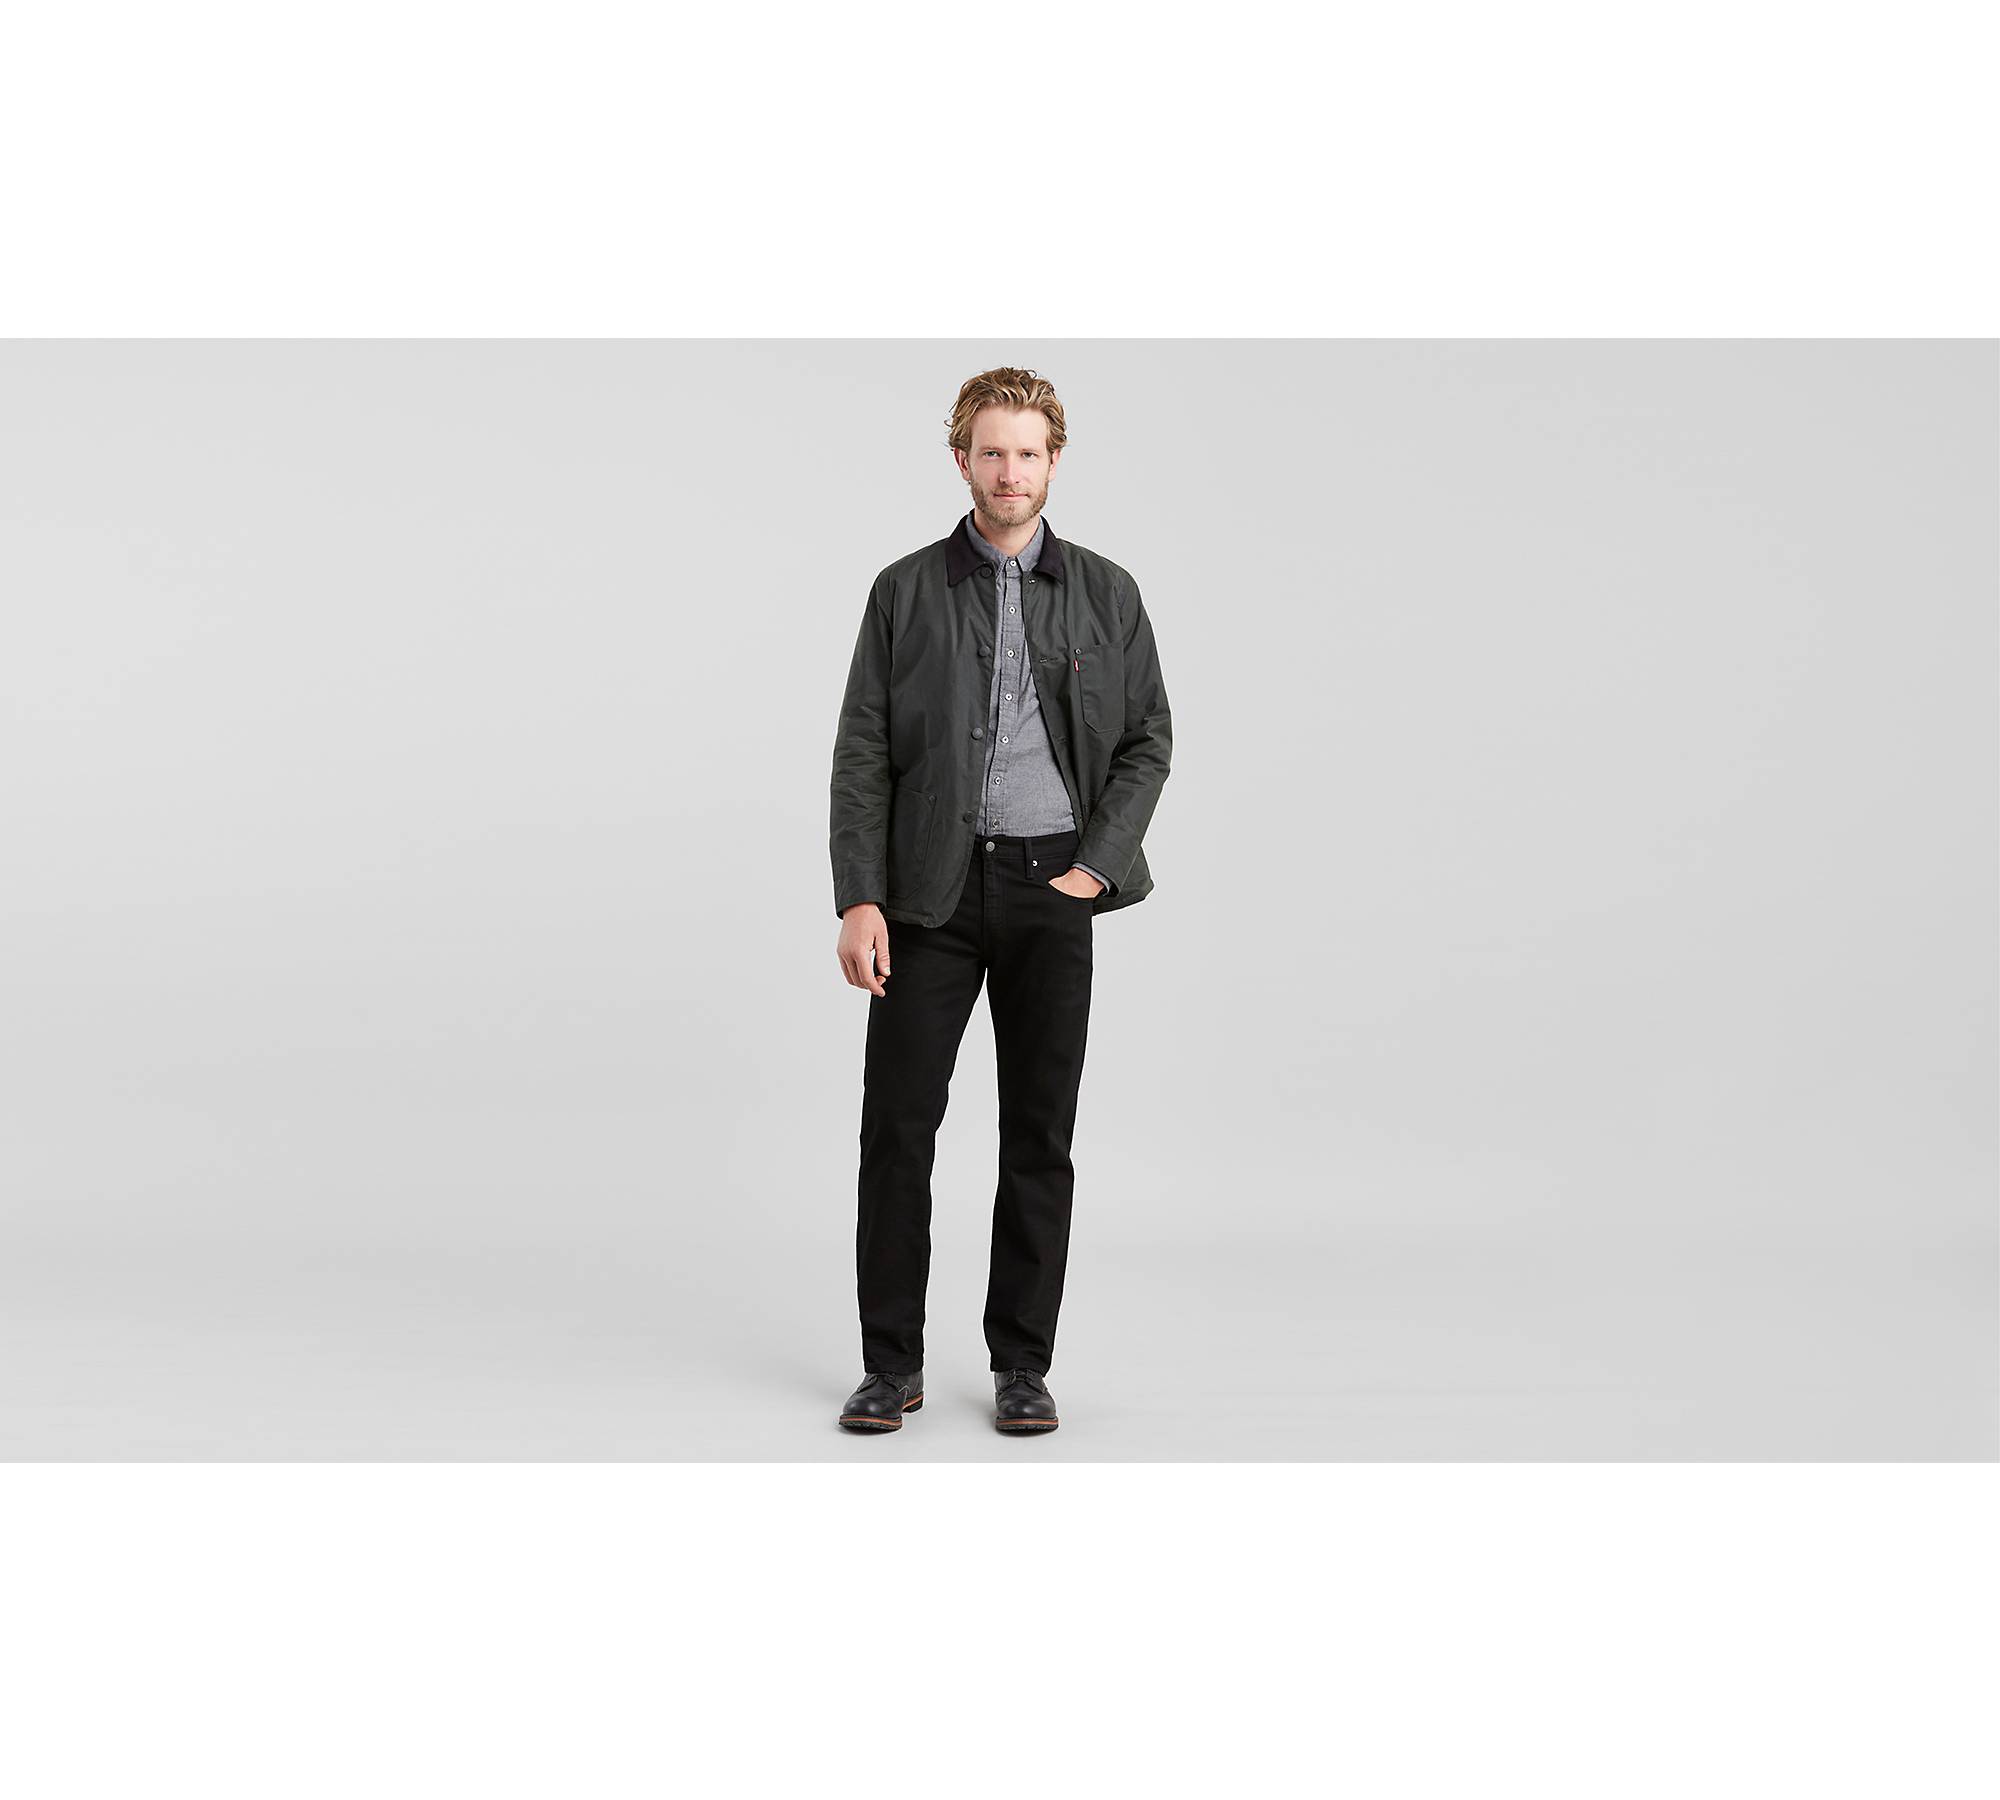 559™ Relaxed Straight Men's Jeans - Black | Levi's® US